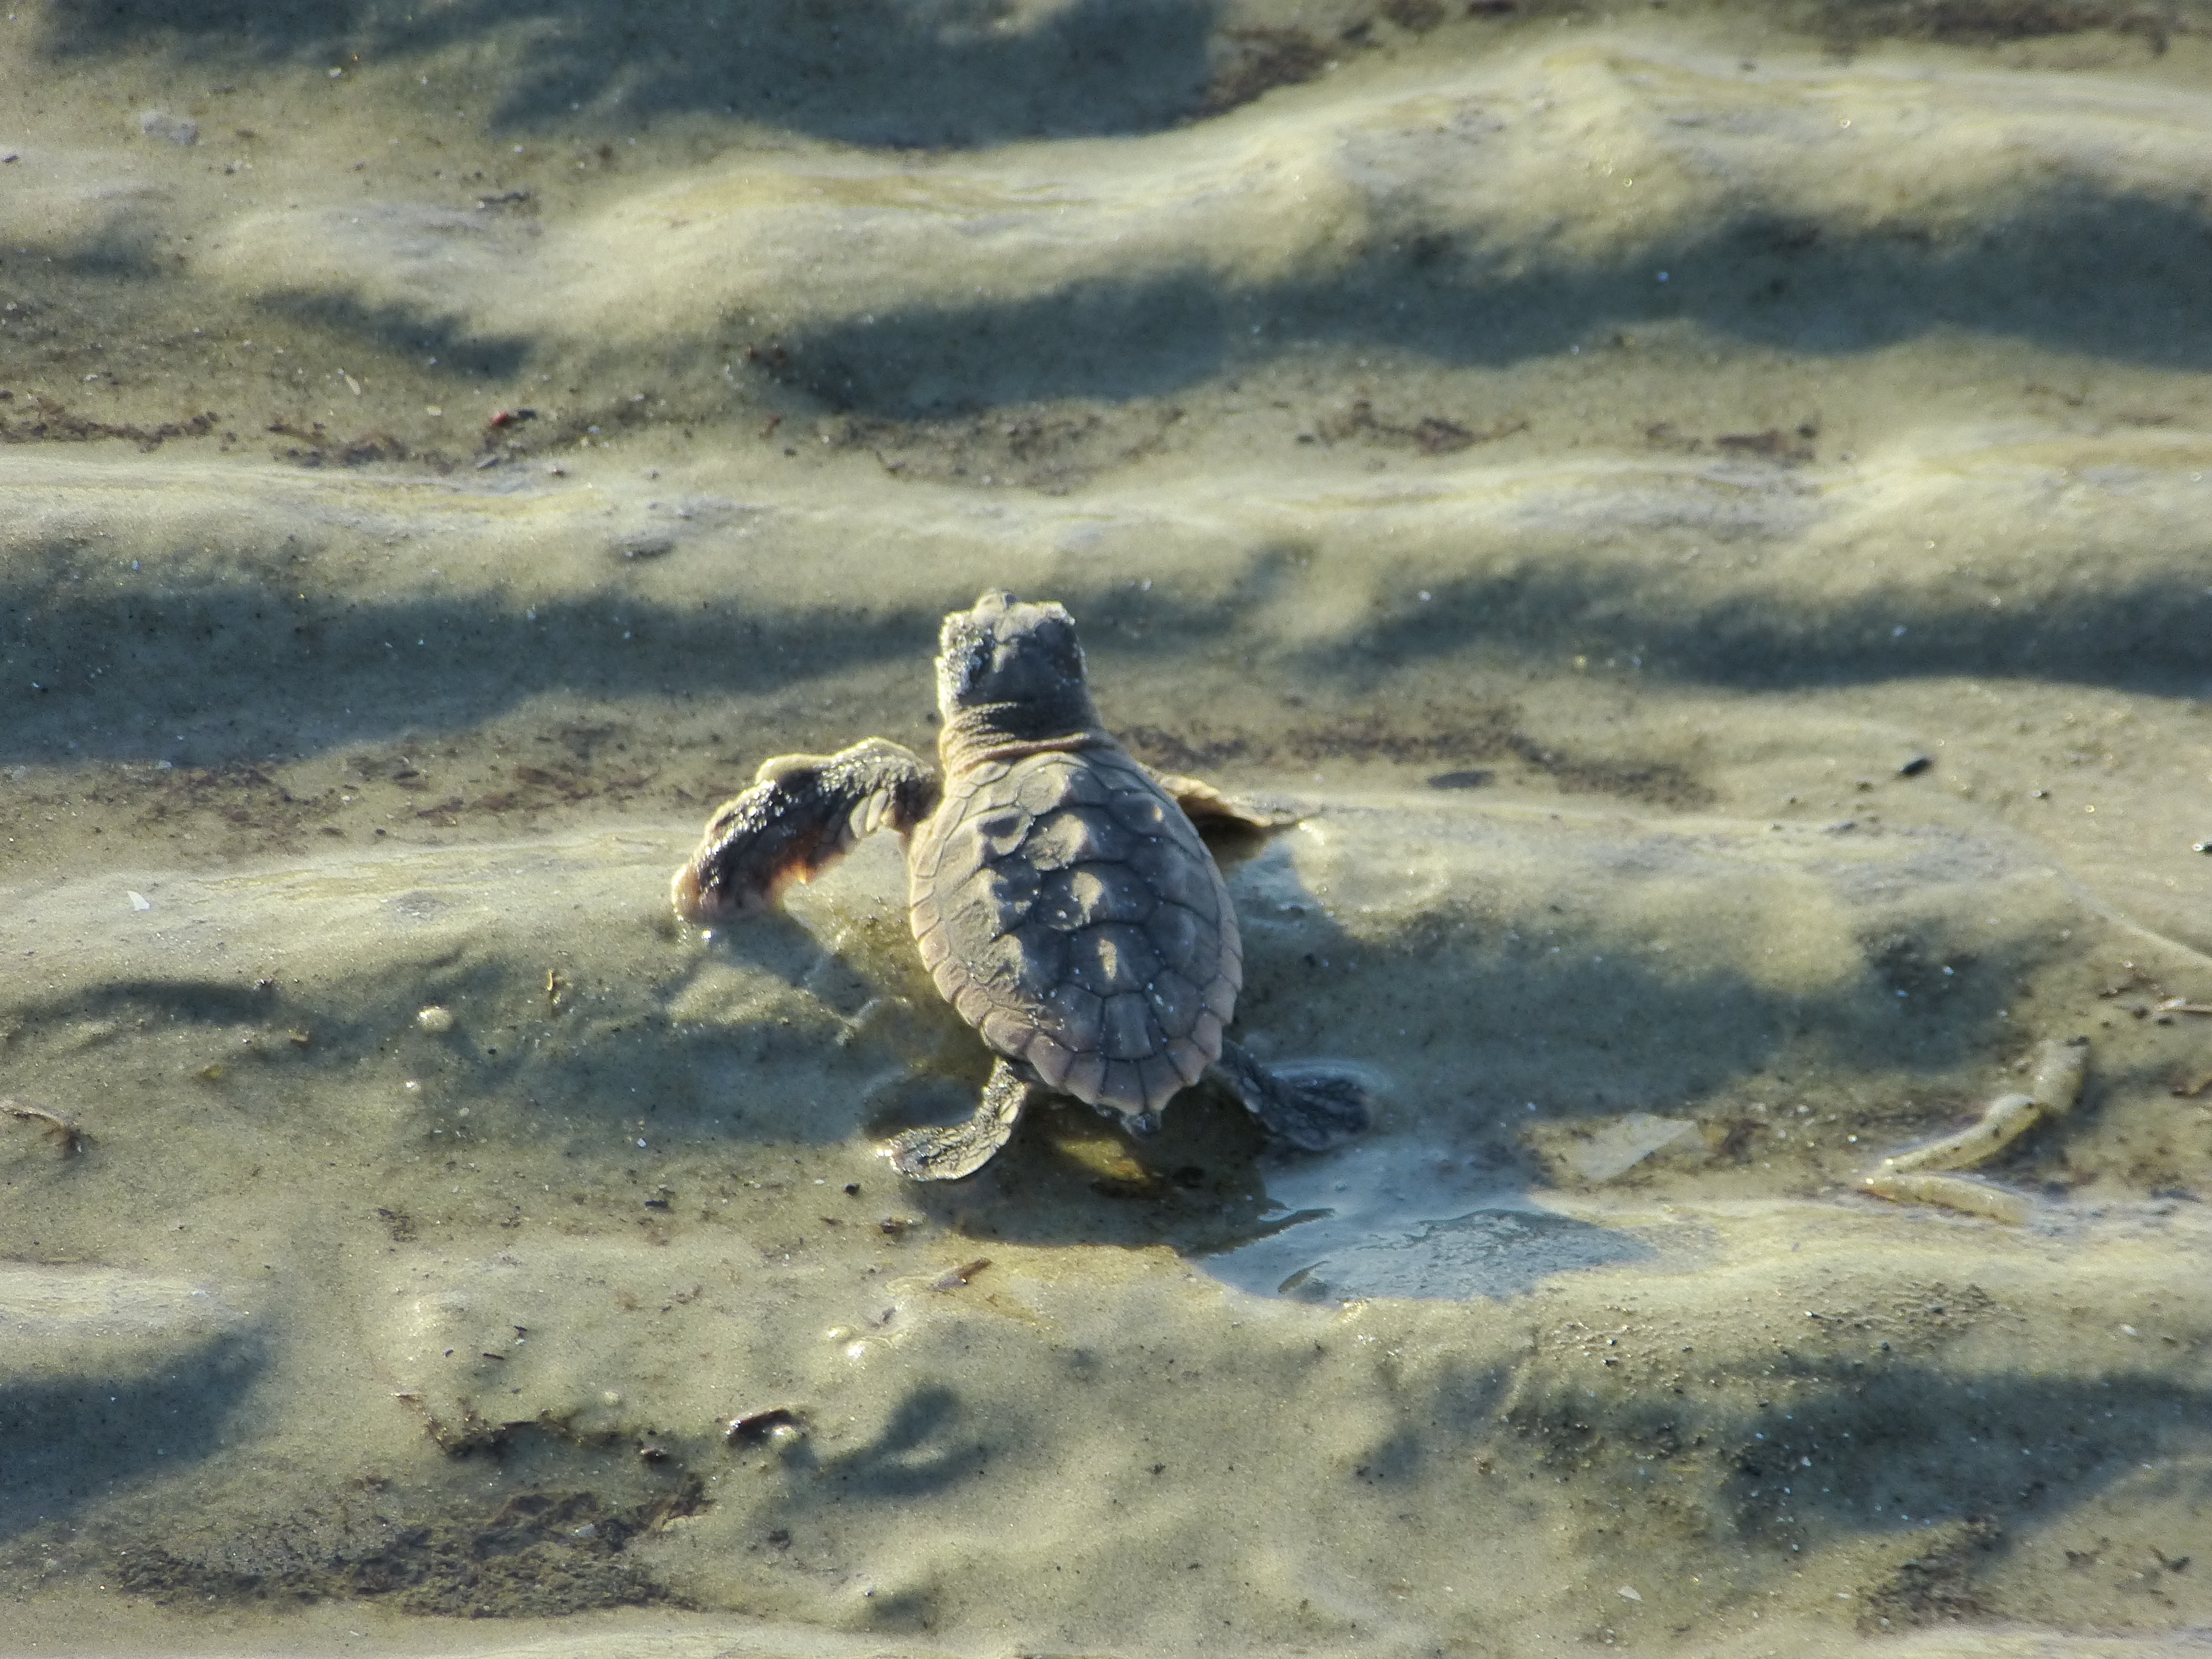 By U.S. Fish and Wildlife Service Southeast Region - Hatchling In Ripples_Uploaded by AlbertHerring, Public Domain, Link